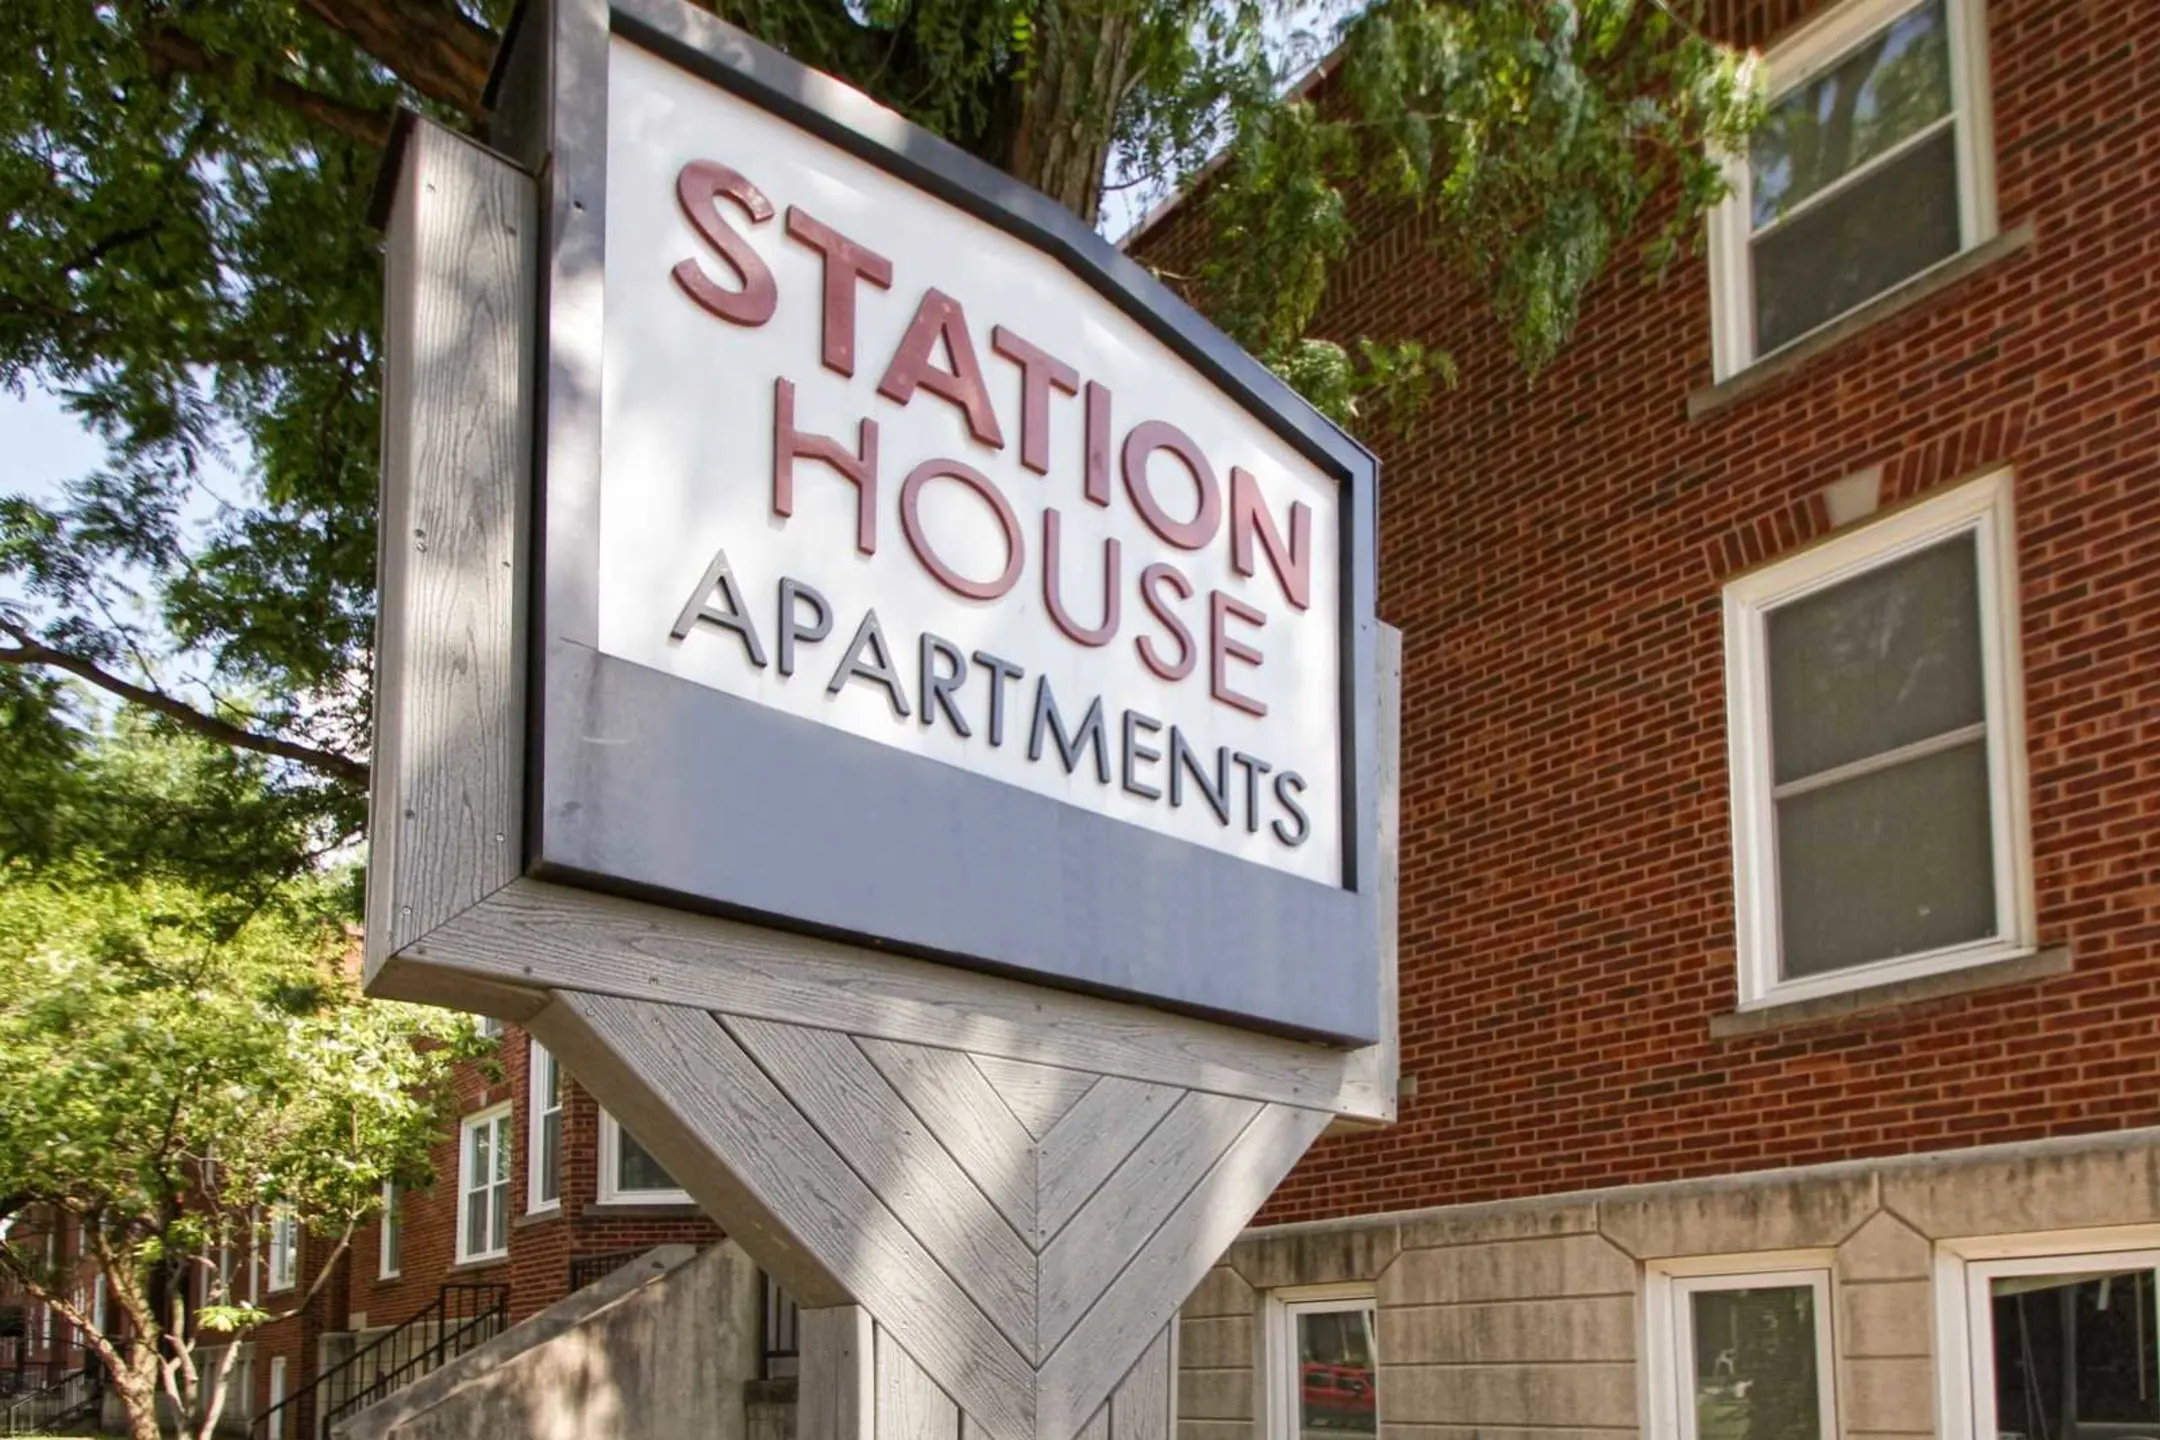 Station House Apartments - Louisville, KY